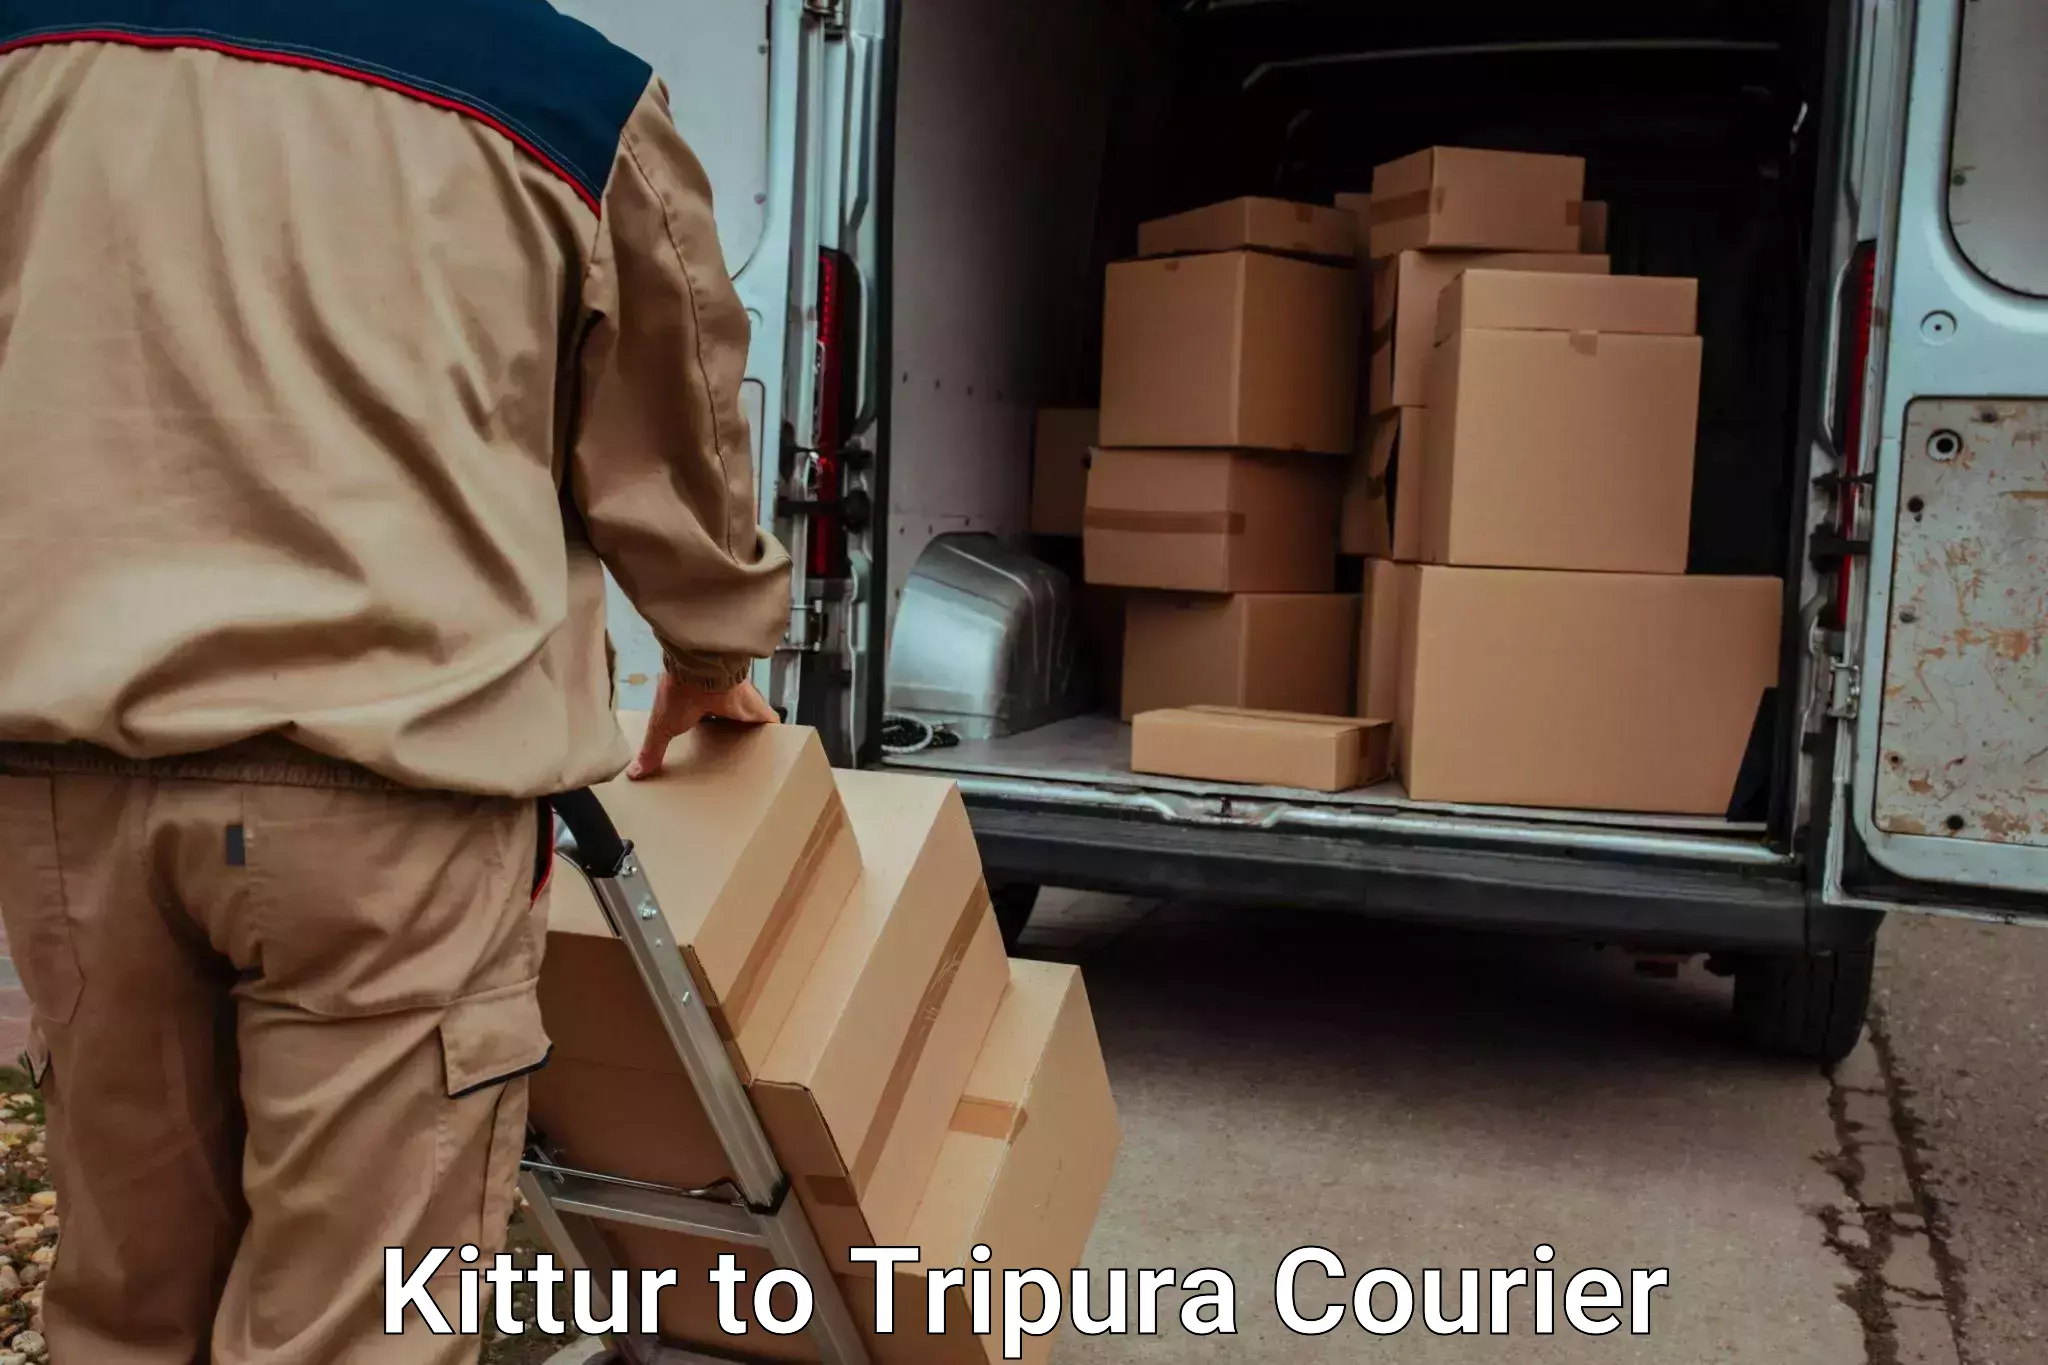 Professional movers and packers Kittur to Tripura